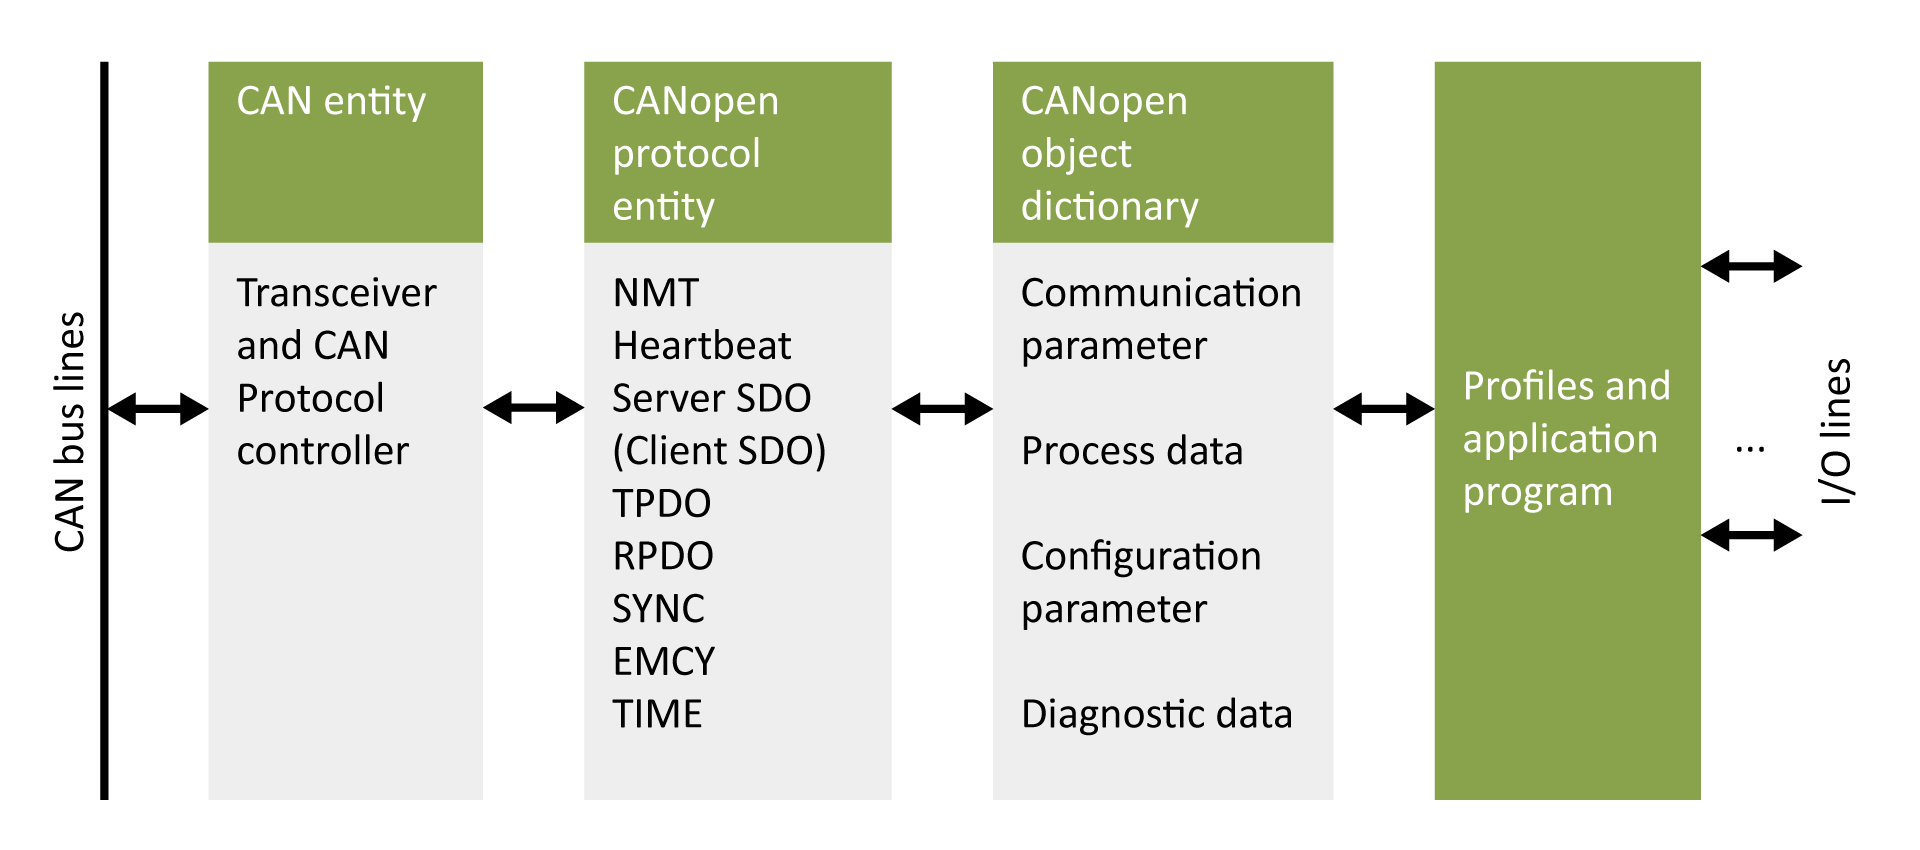 The CANopen device model